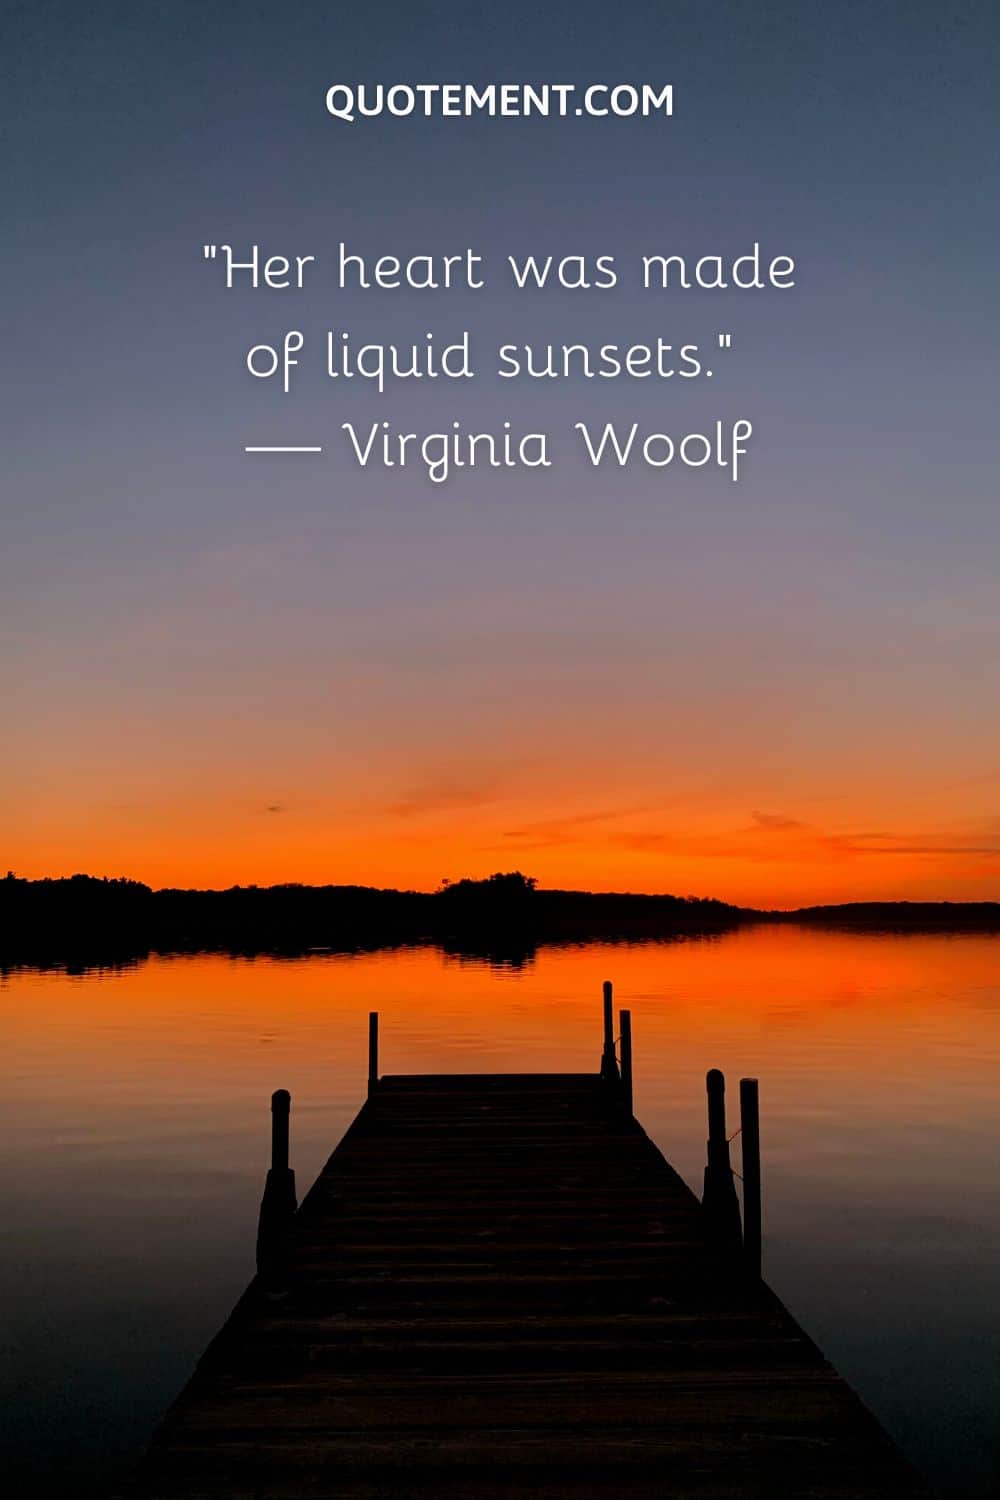 “Her heart was made of liquid sunsets.” — Virginia Woolf